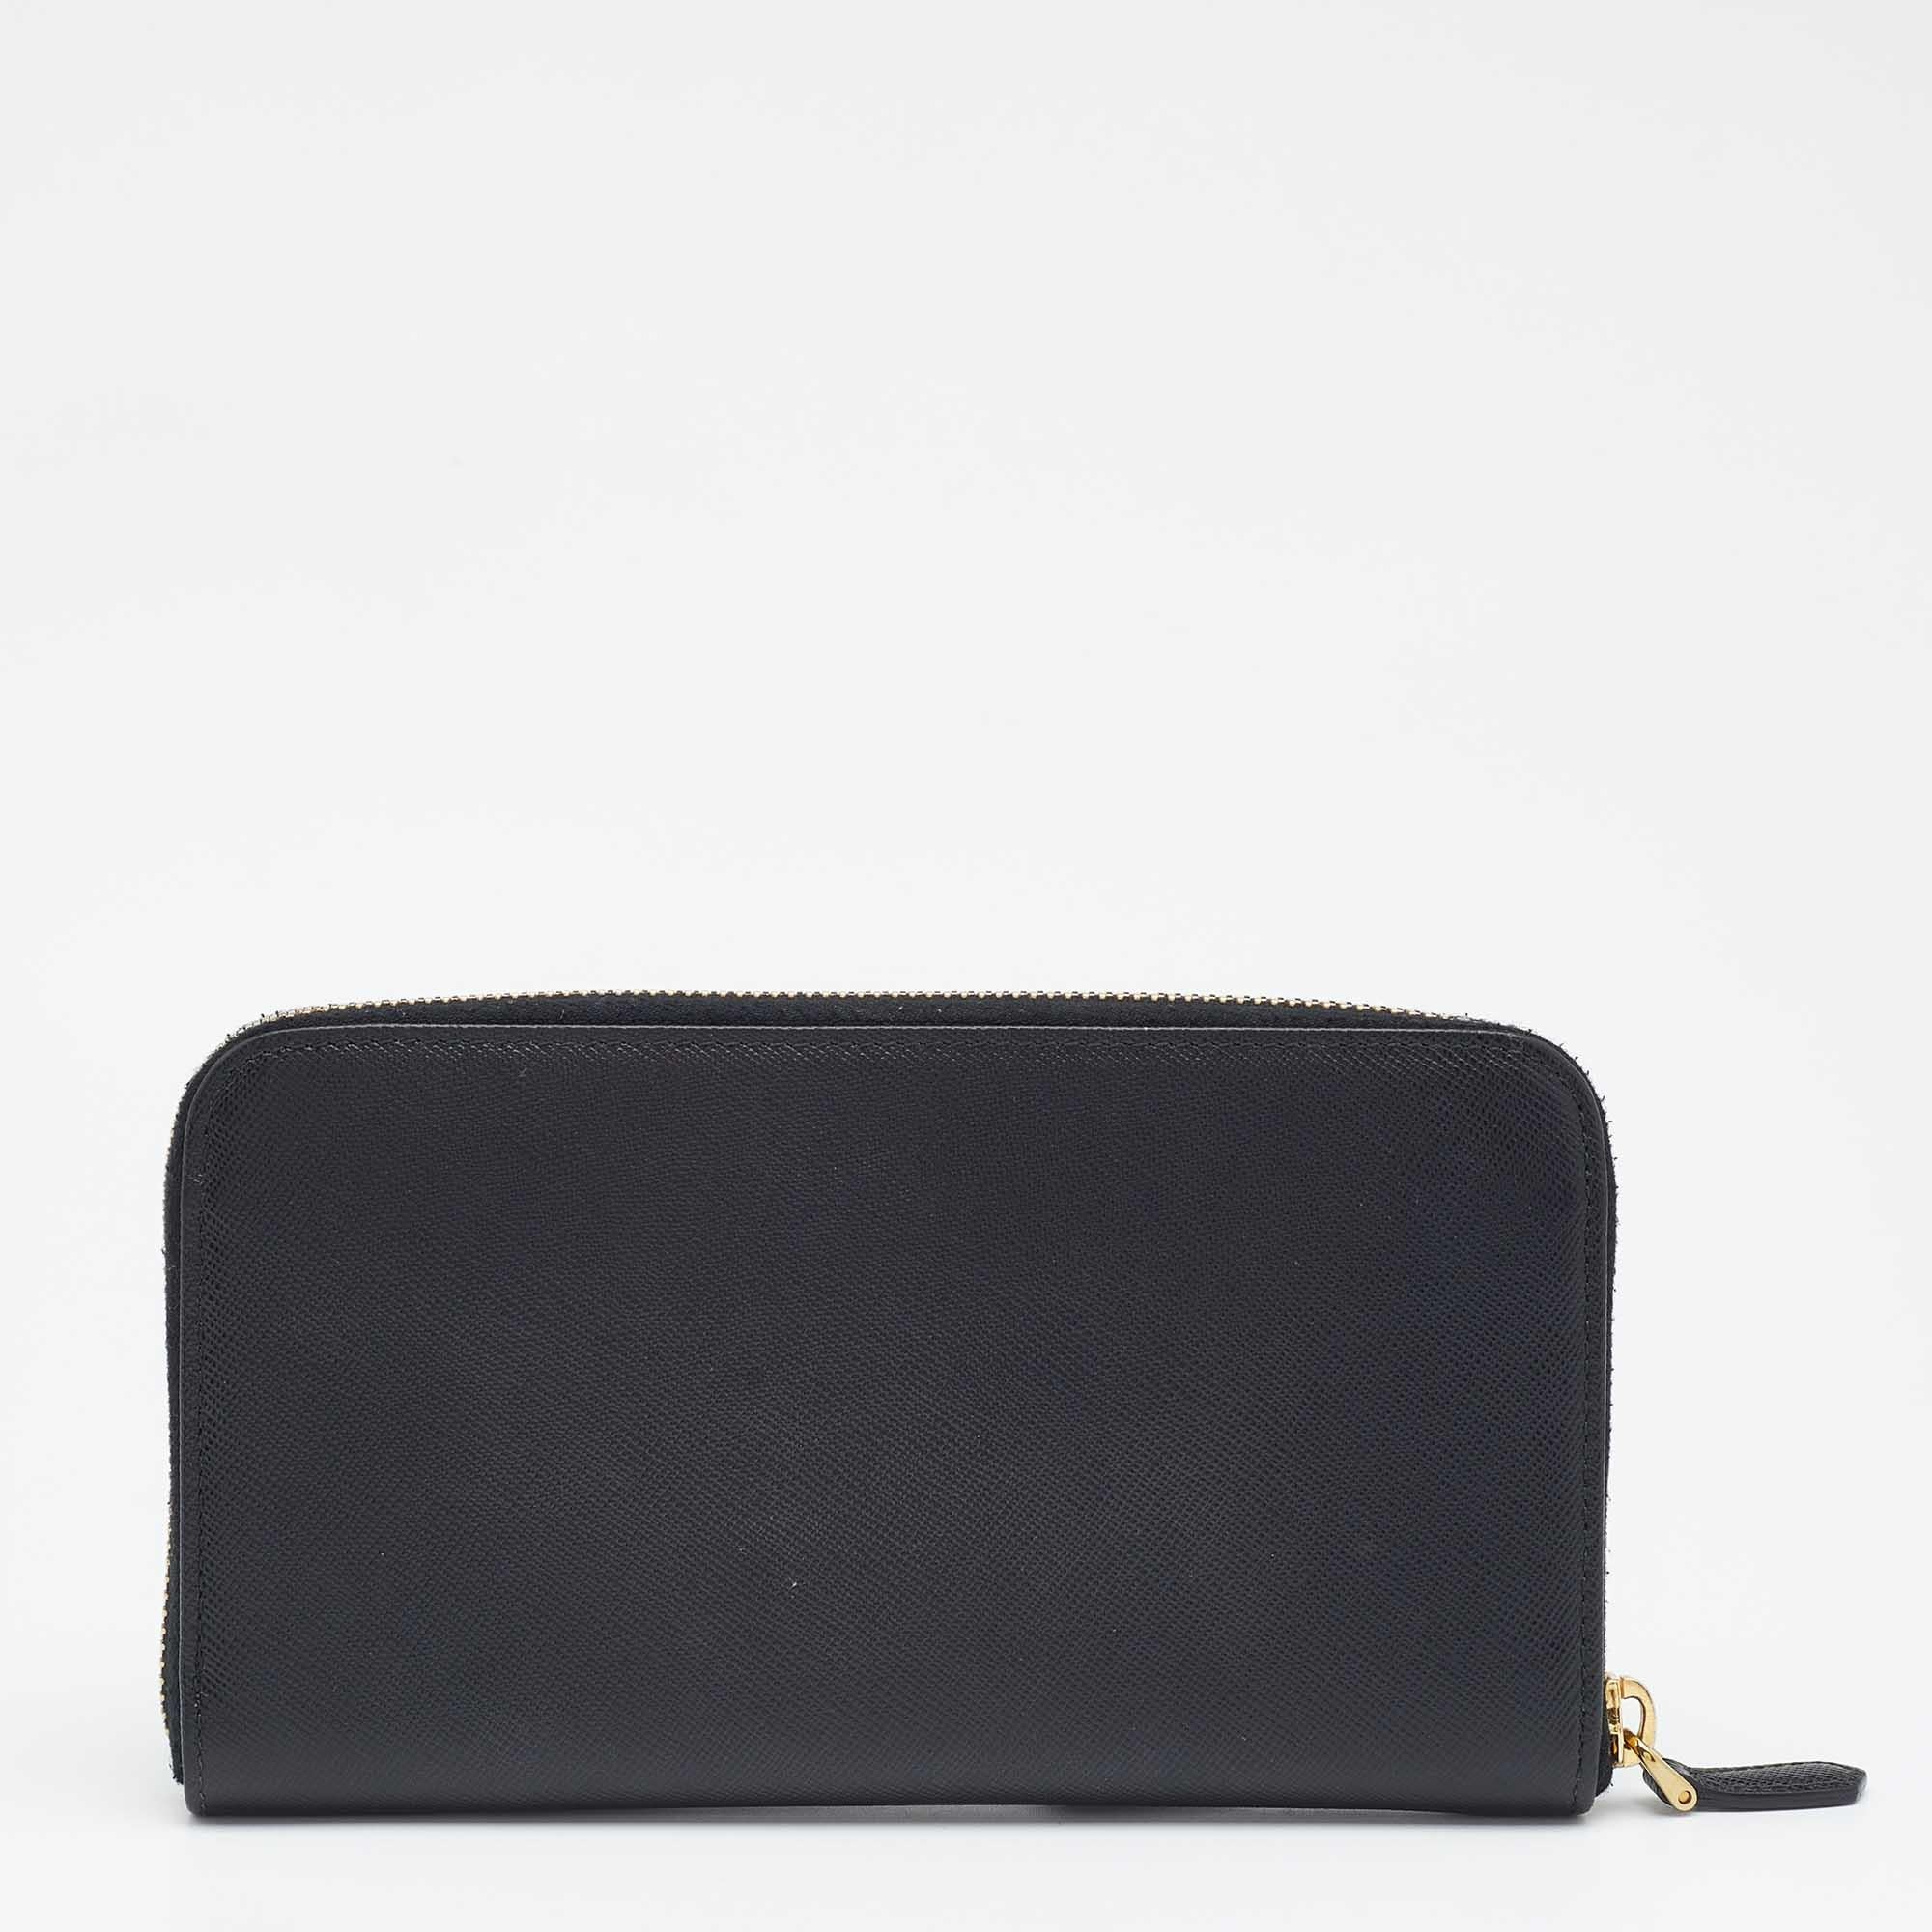 Store your monetary essentials hassle-free in this wallet from Prada. Durable and stylish, it is crafted from Saffiano leather in a black shade. The zip-around closure secures multiple compartments, and the front is adorned with a logo accented